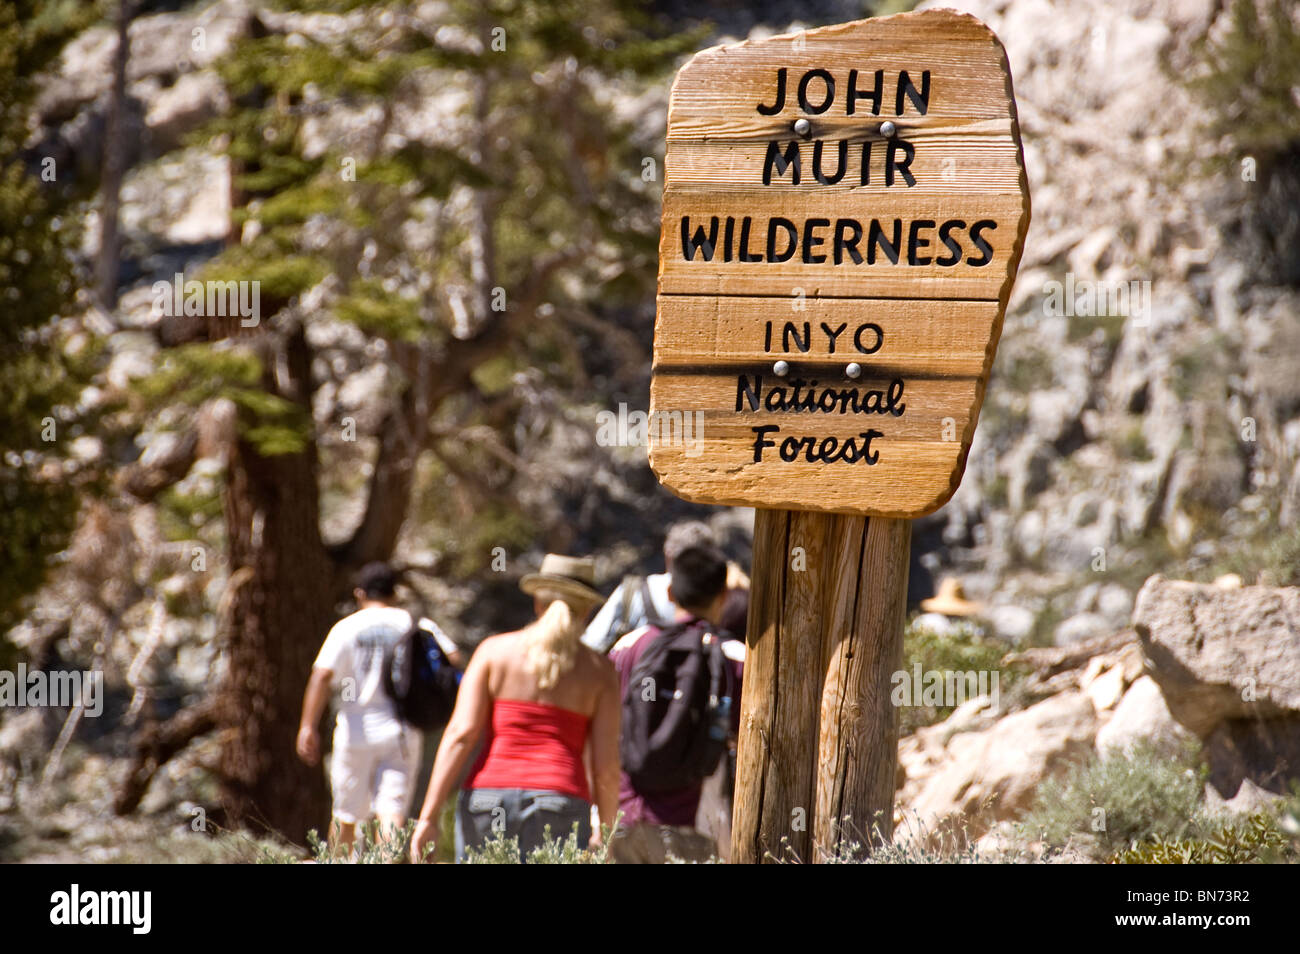 Hikers on the John Muir Wilderness trail, Inyo National Forest Stock Photo